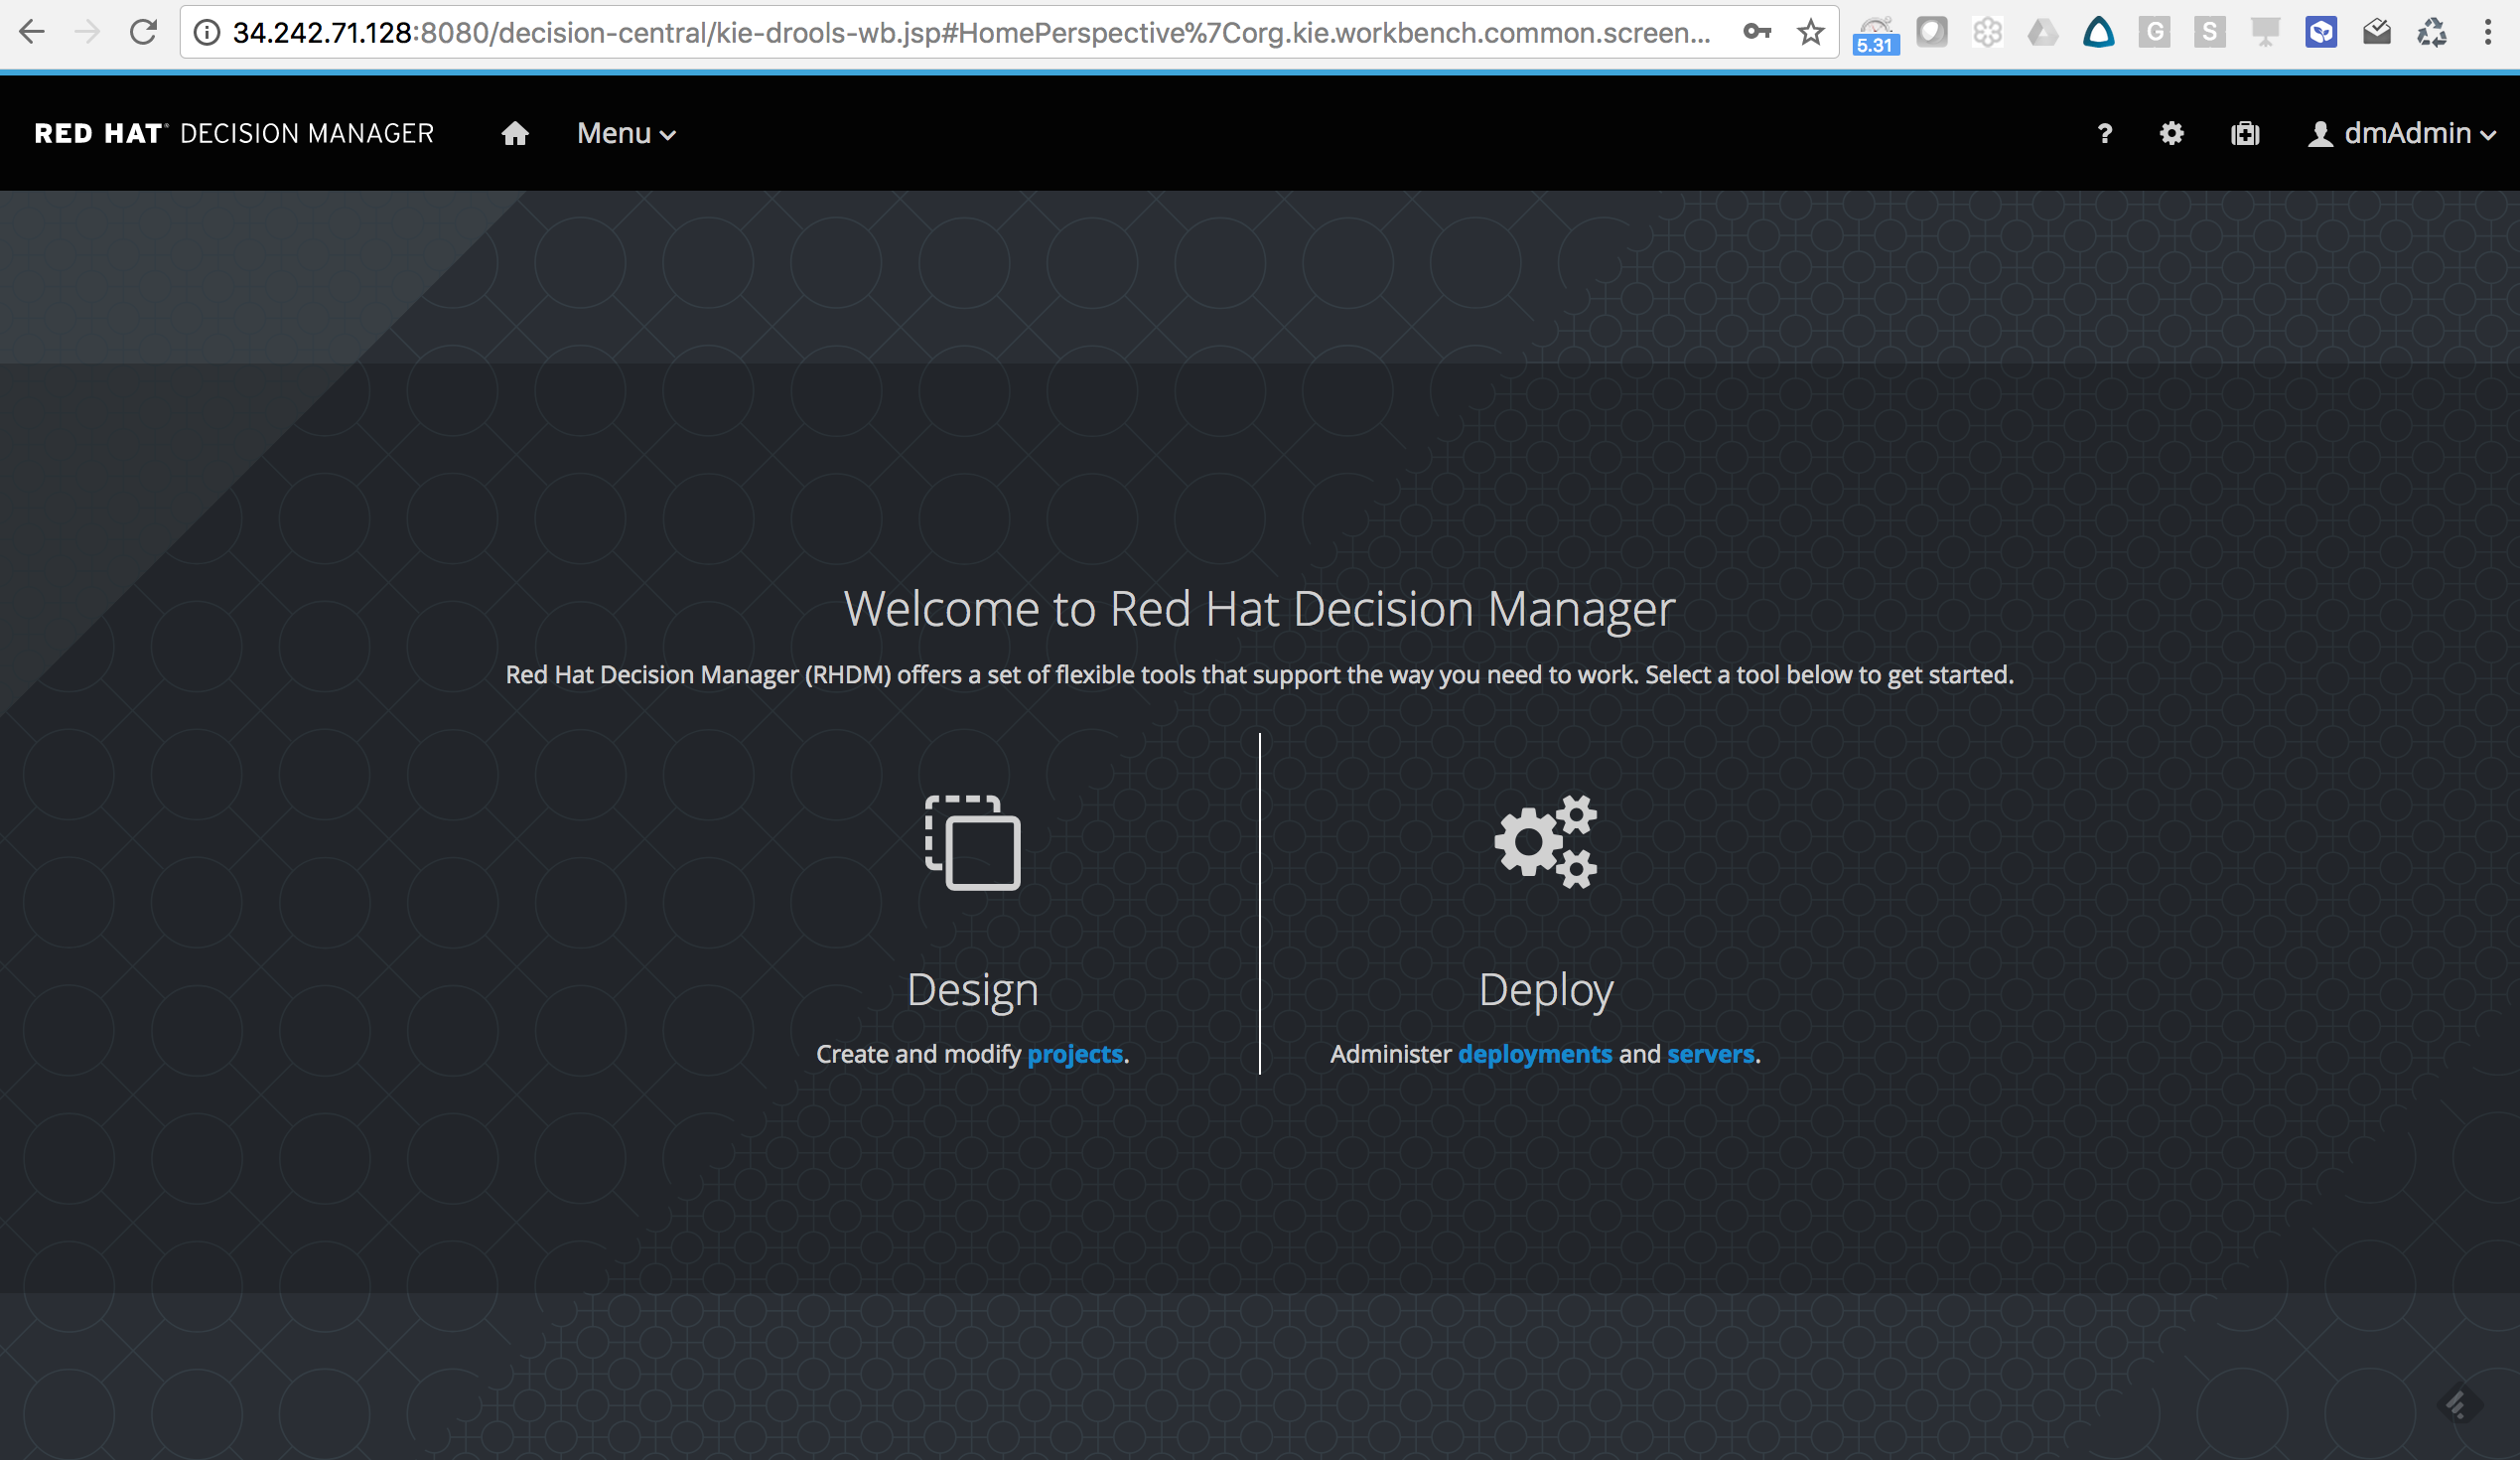 RedHat Decision Manager 7